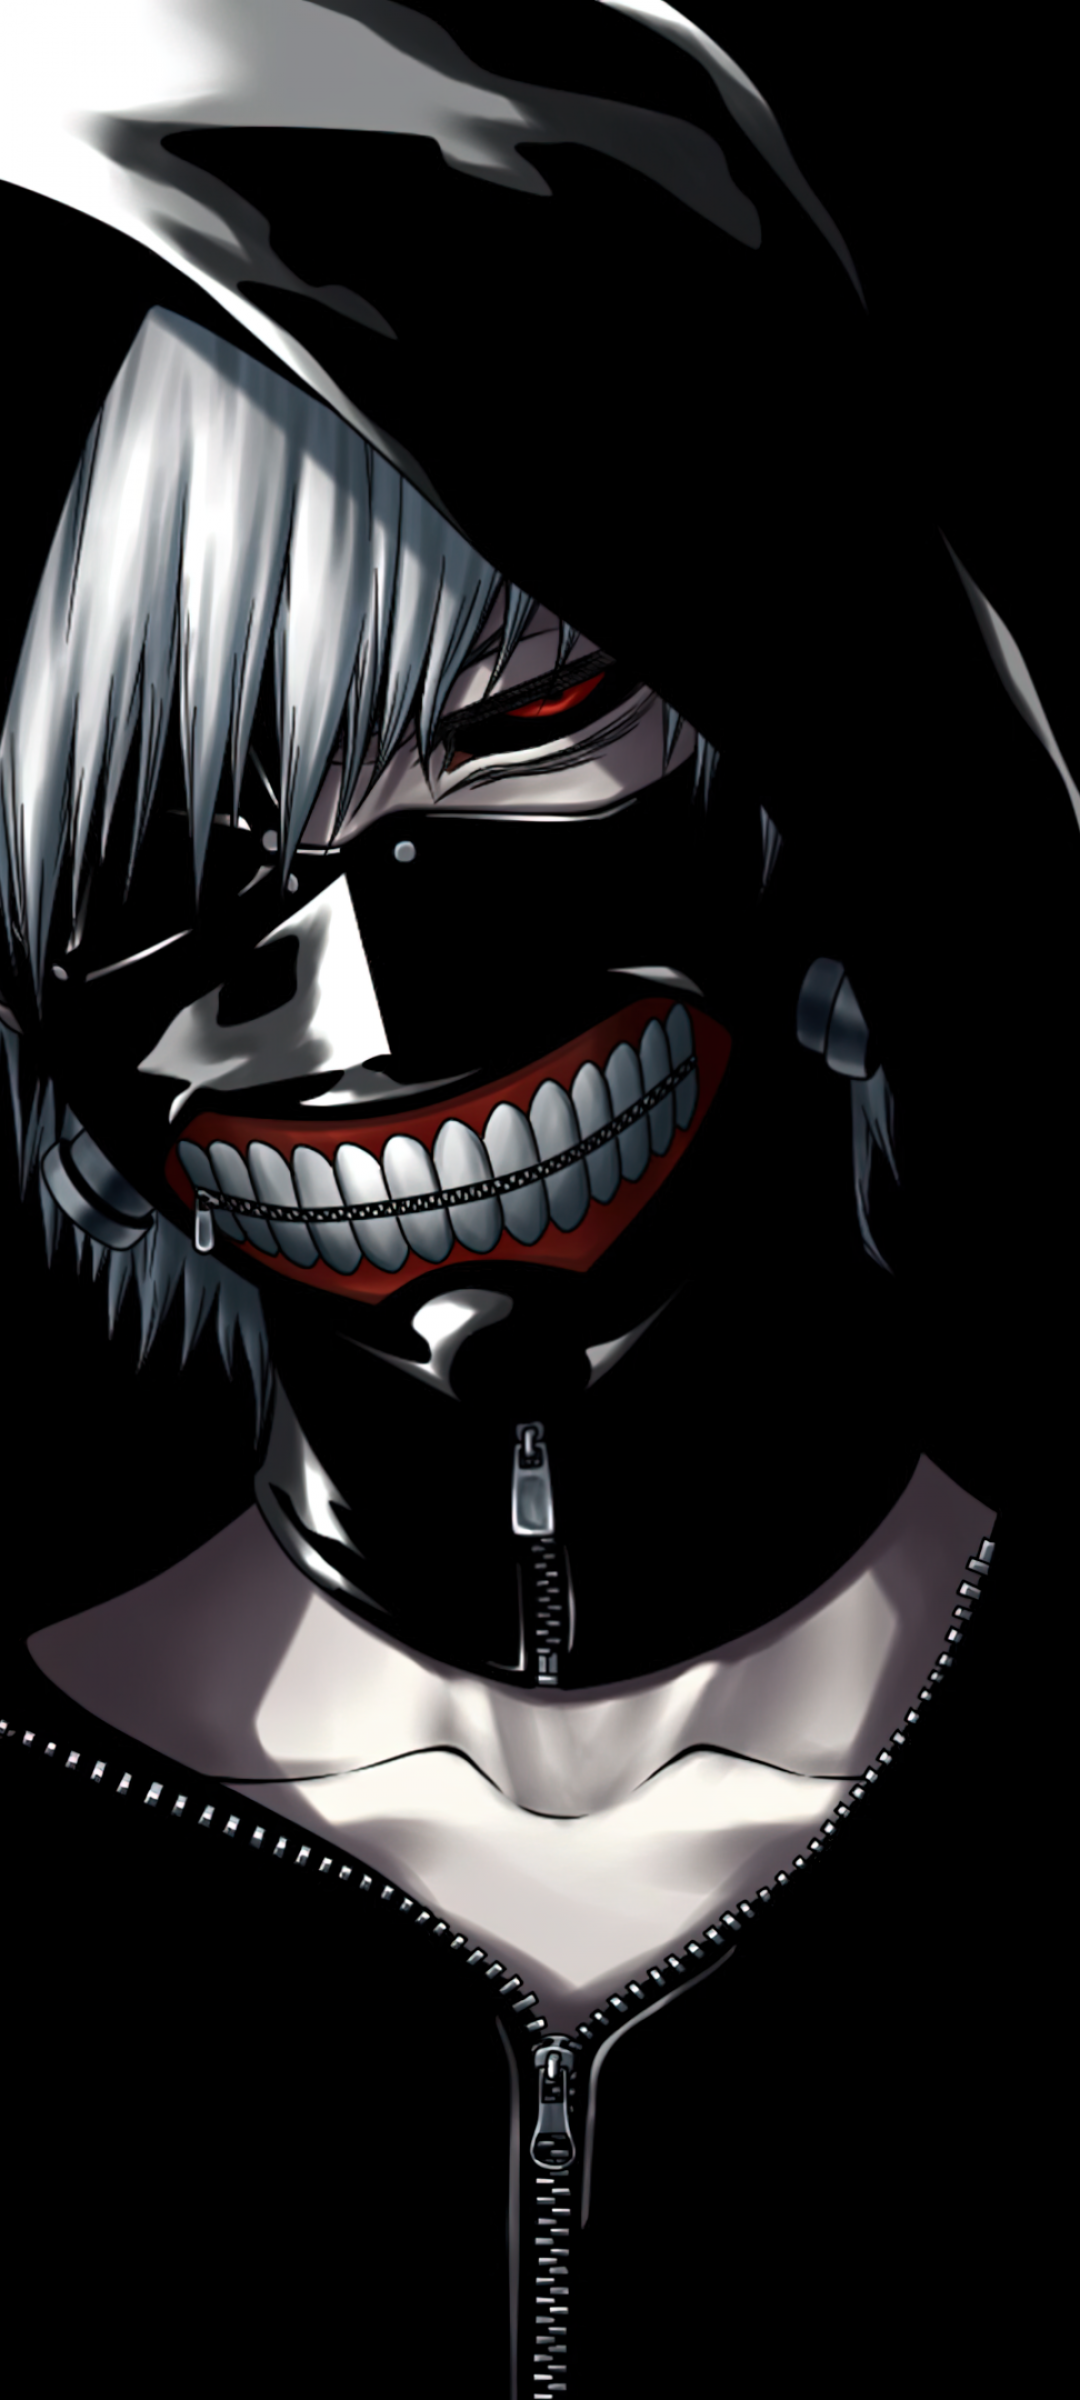 800x1280 Ken Kaneki Tokyo Ghoul 5k Nexus 7Samsung Galaxy Tab 10Note  Android Tablets HD 4k Wallpapers Images Backgrounds Photos and Pictures